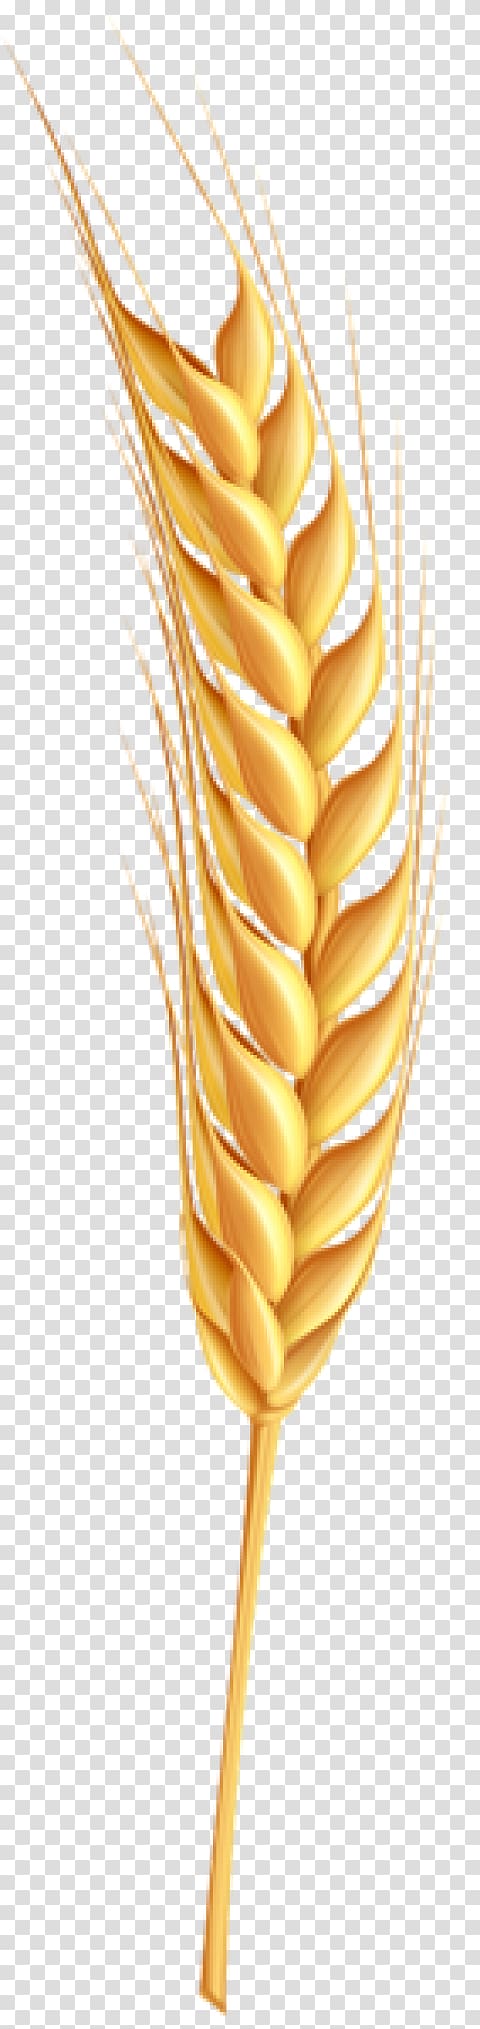 Wheat, wheat transparent background PNG clipart